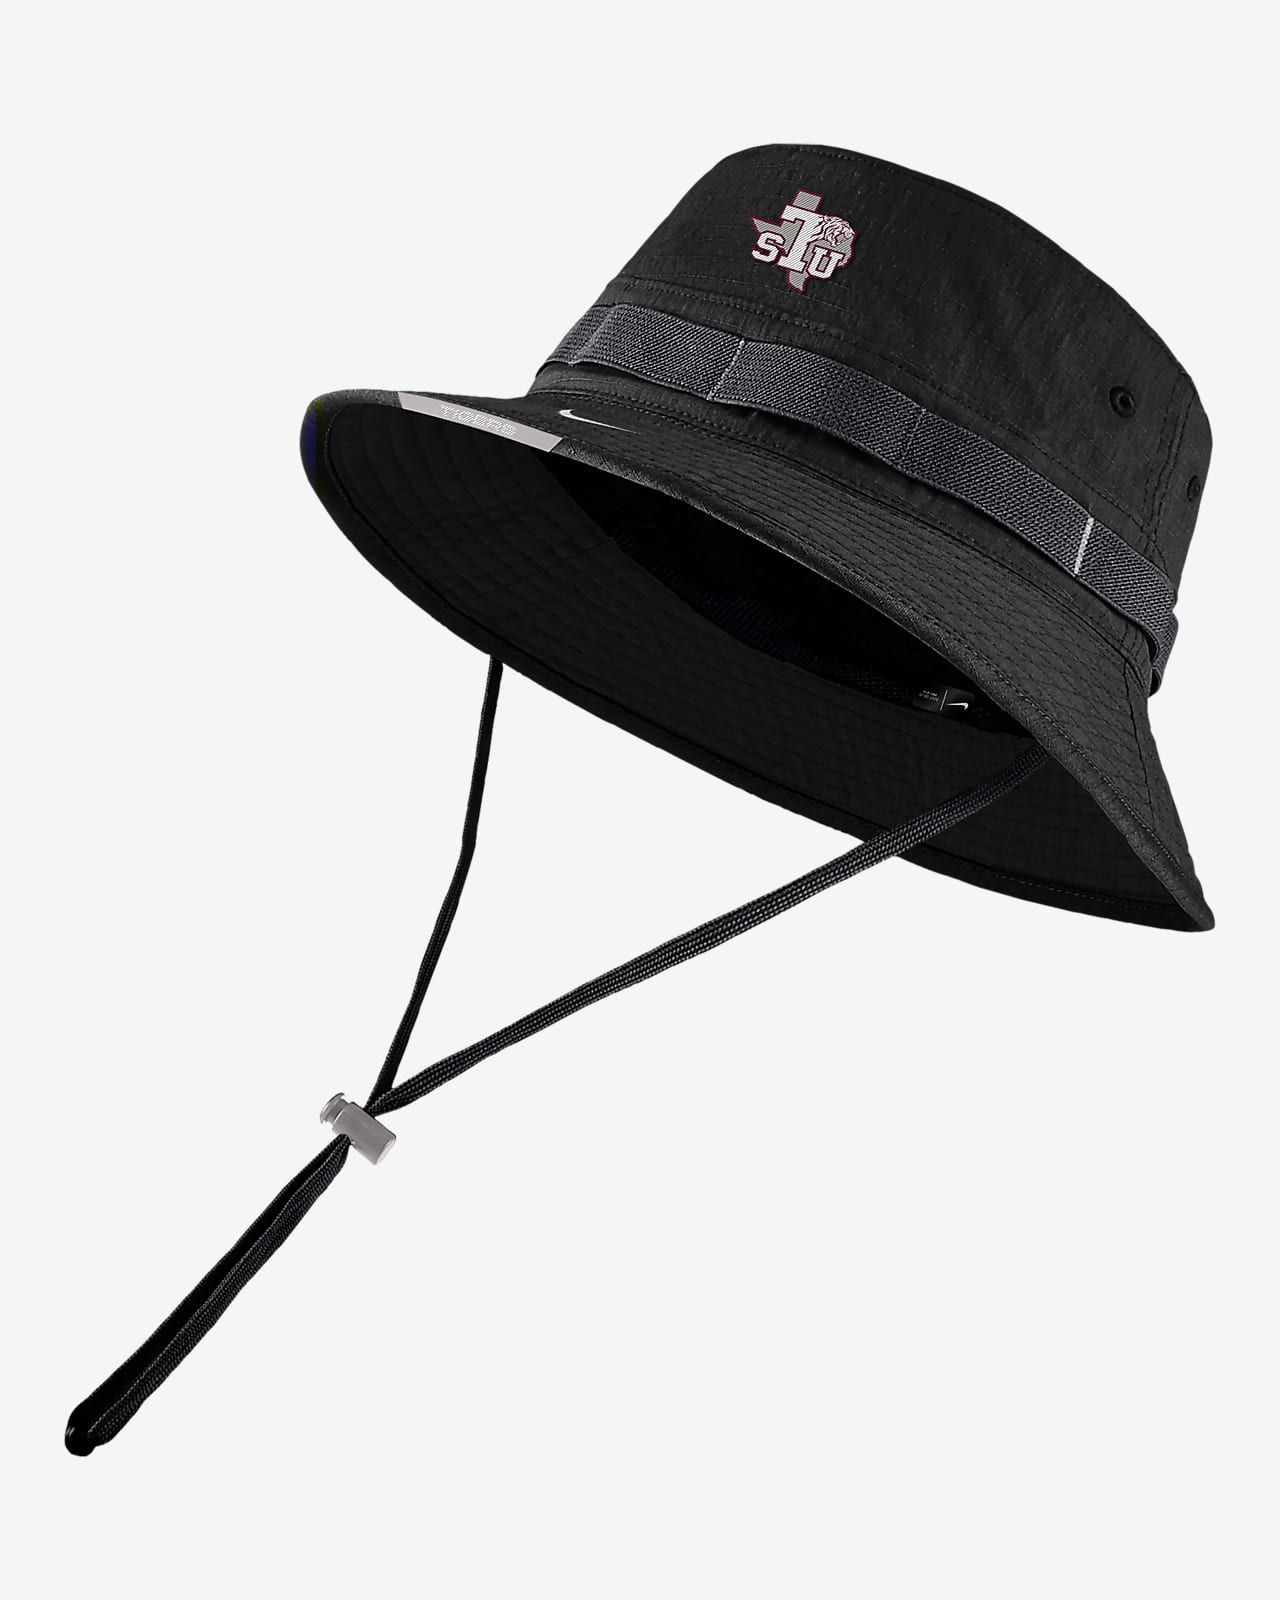 Texas Southern Nike College Boonie Bucket Hat